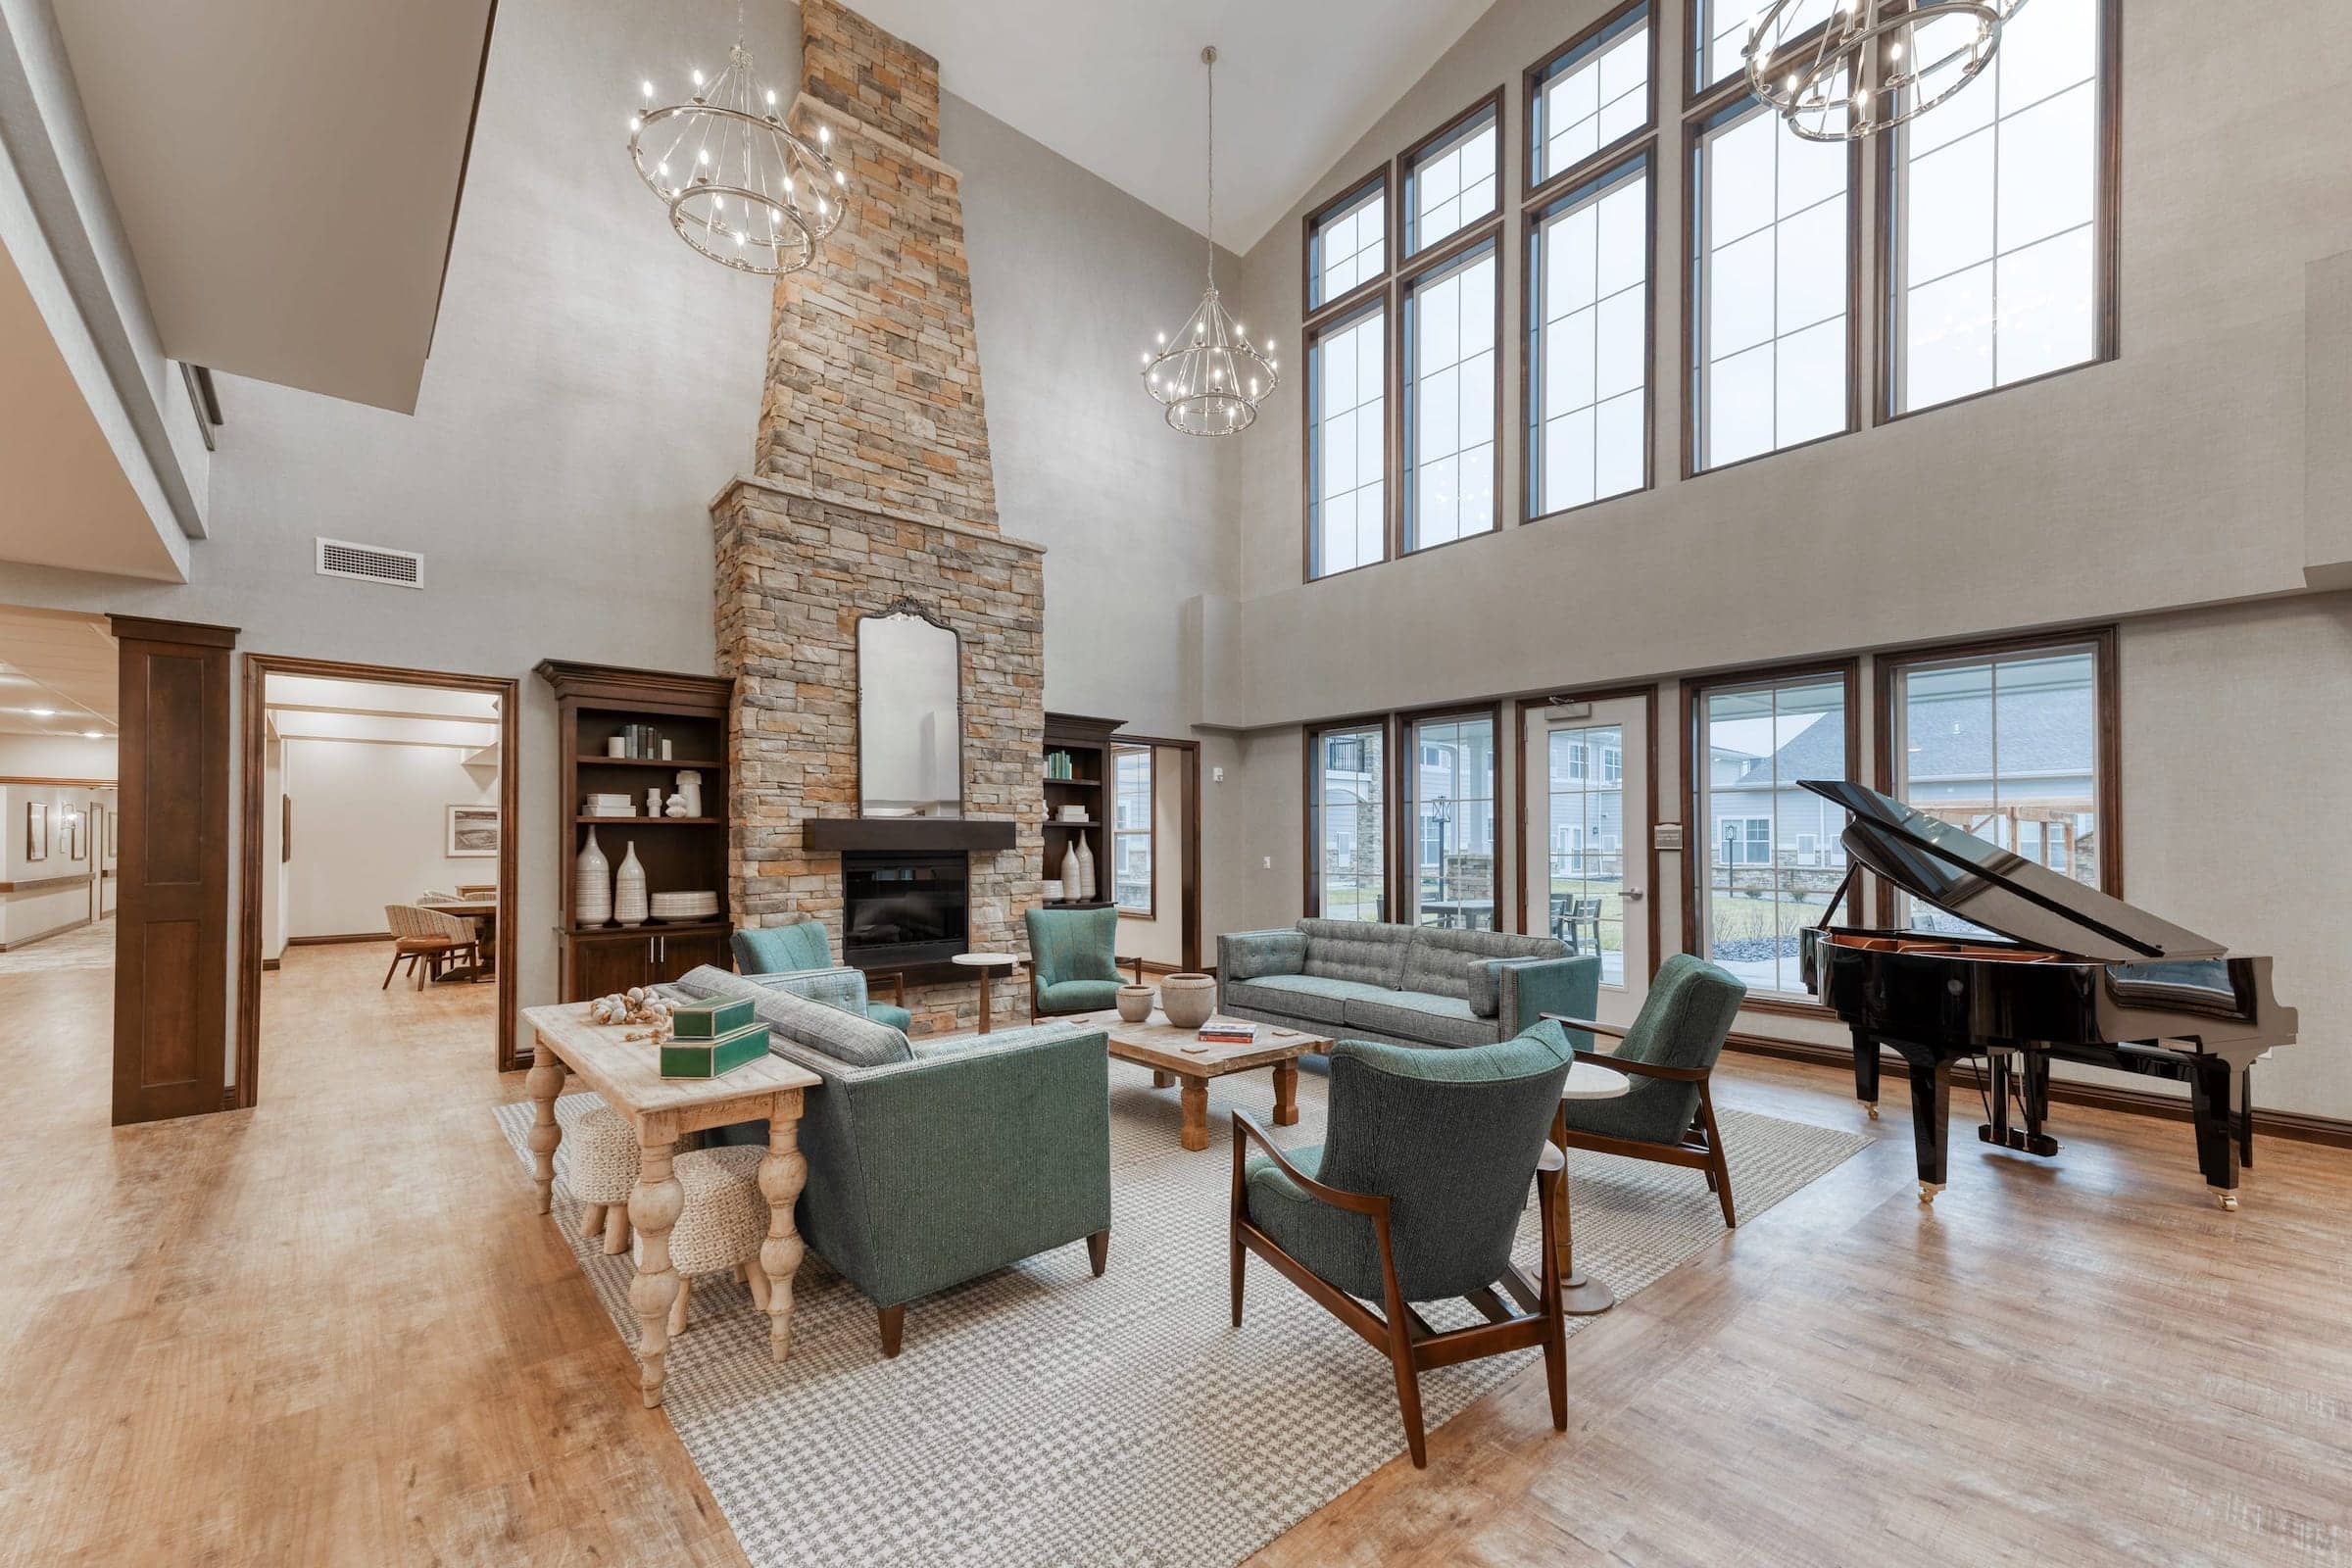 Open community space featuring a stone fireplace and communal piano